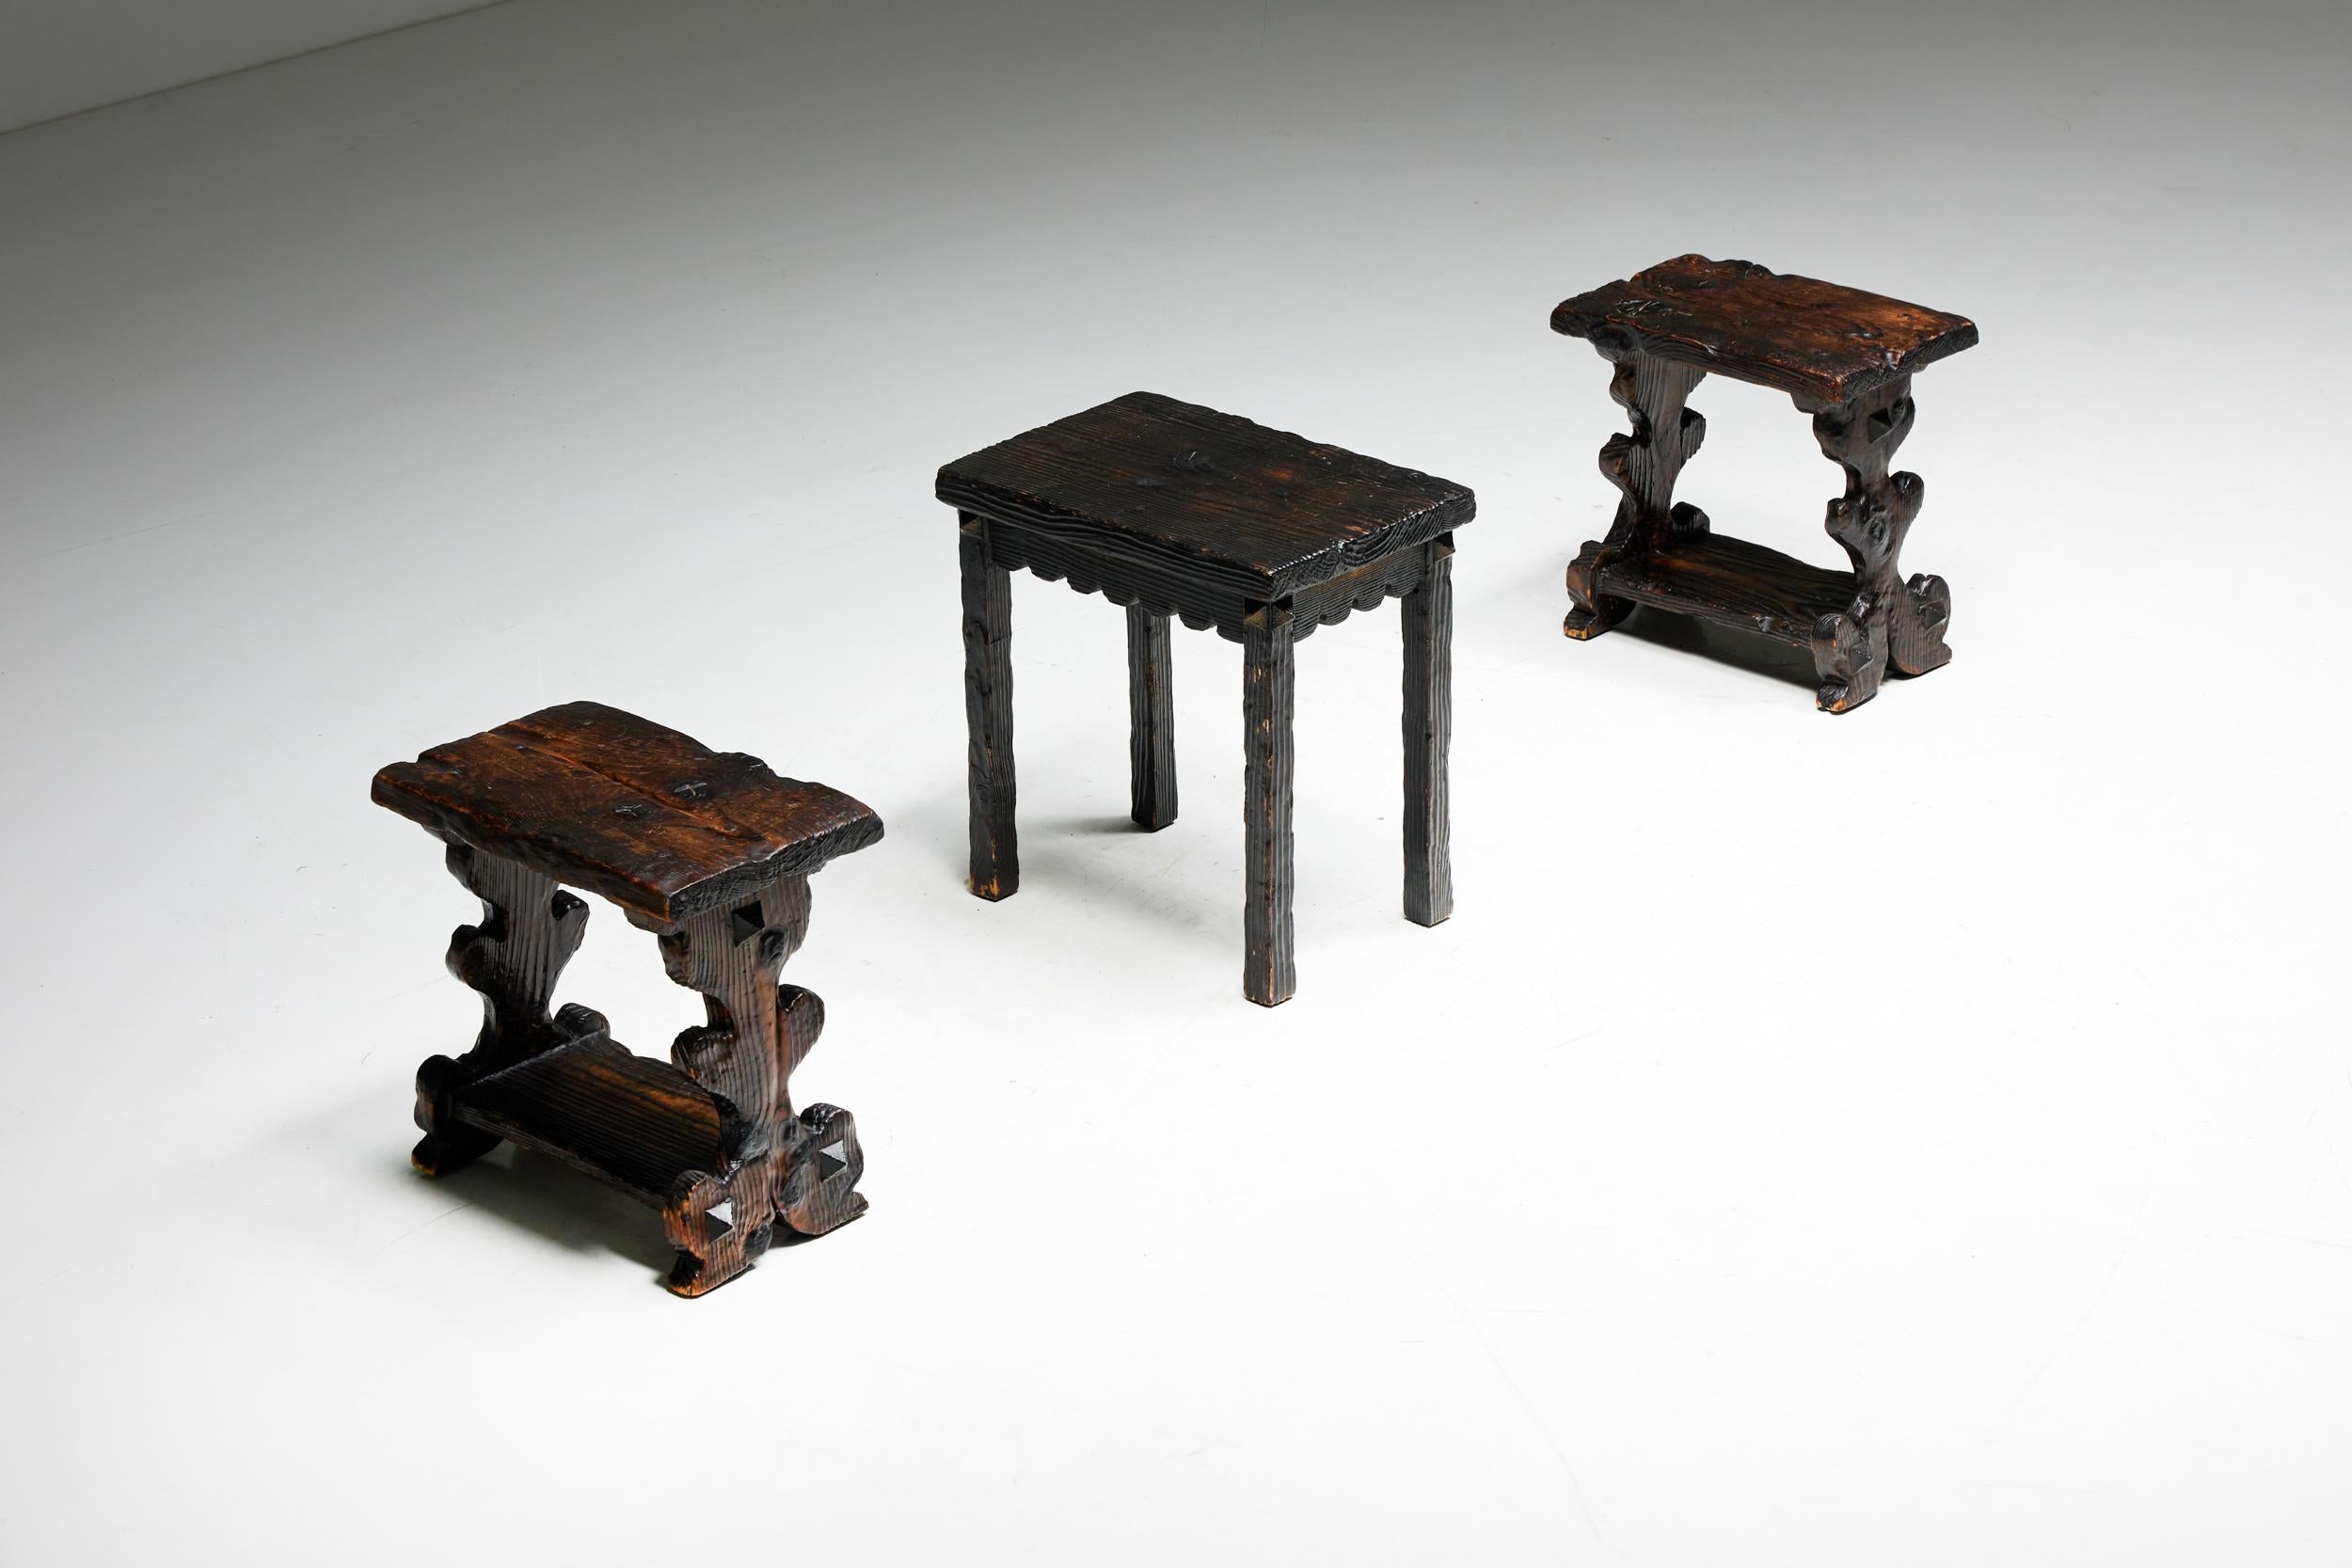 Brutalist Design; Dark Solid Wood; Monoxylite; Folk Art; Travail Populaire; Art Populaire; Wabi Sabi; Stools; Mid-Century; 1950s; France;

Brutalist stools, beautiful handmade pieces that date back to the 1950s. The rich, dark legs of solid wood are